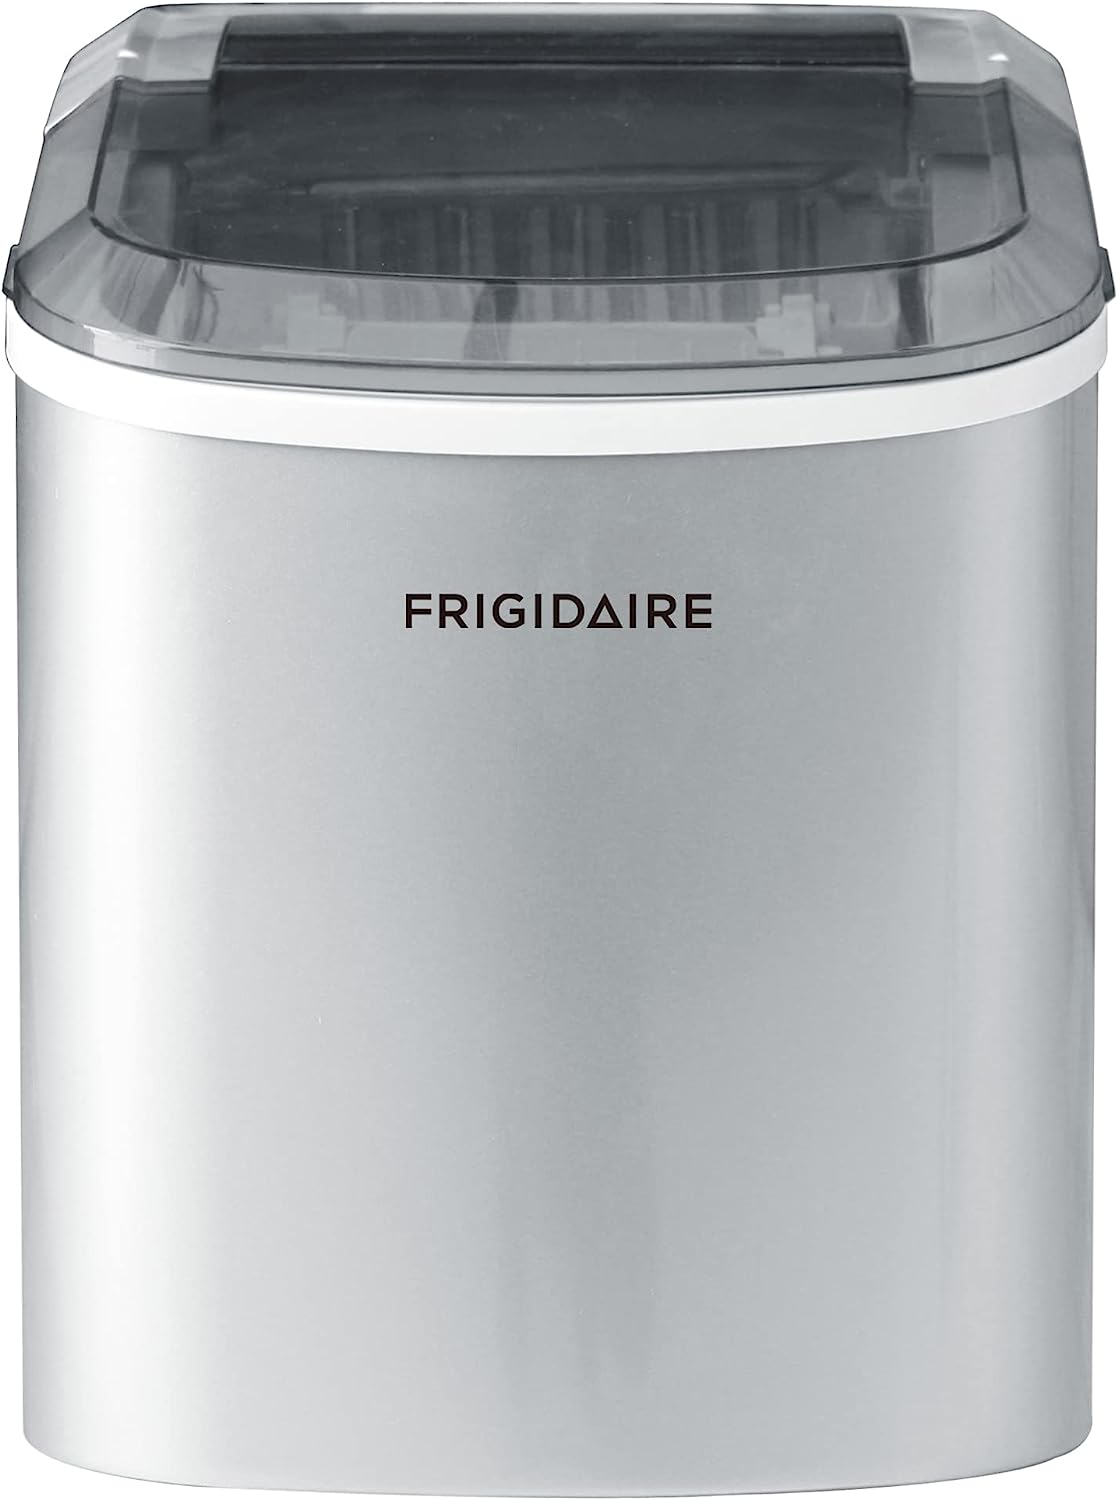 FRIGIDAIRE EFIC189-Silver Compact Ice Maker 26 lb  Review